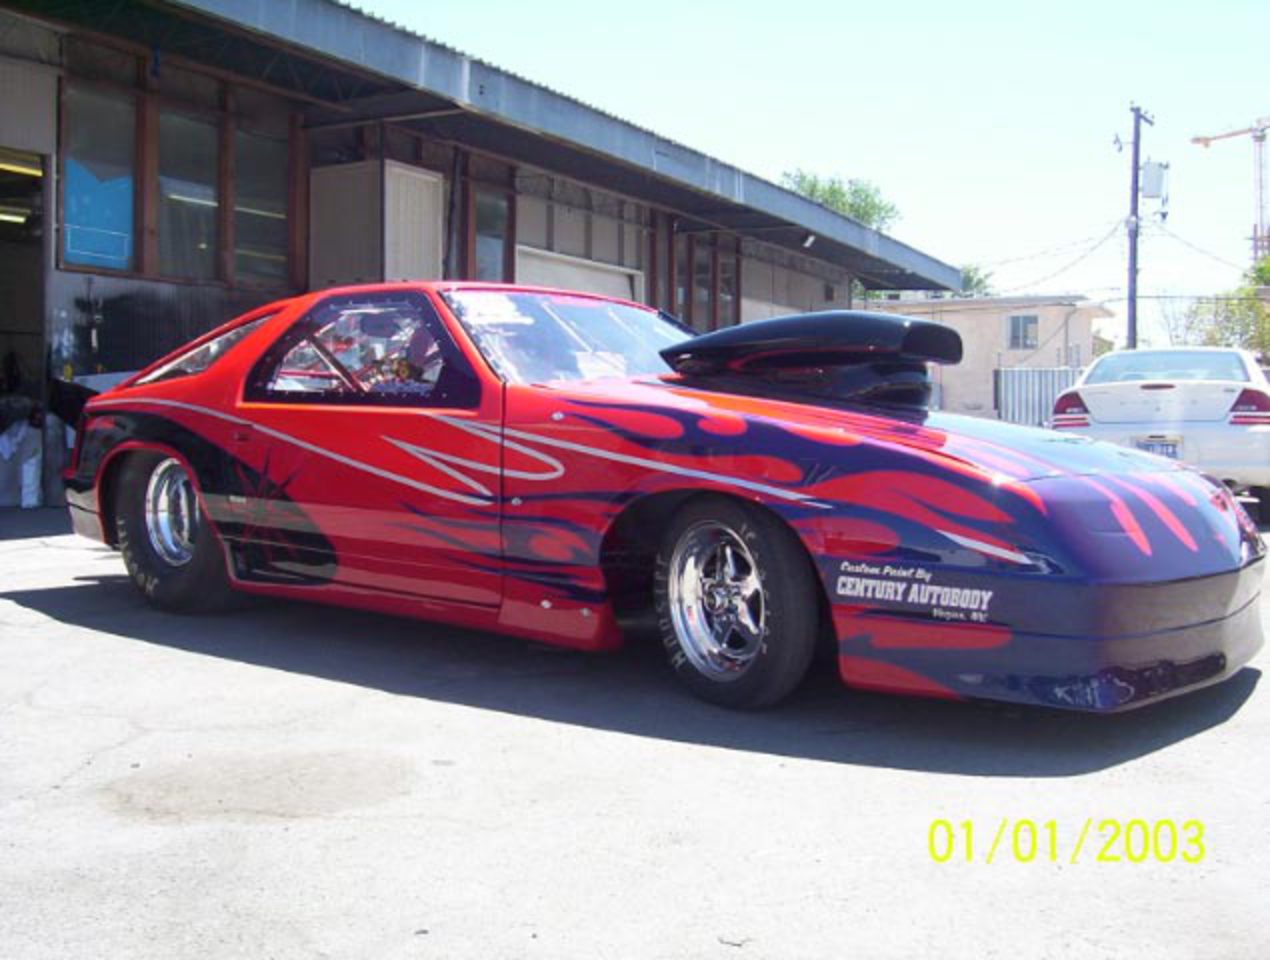 Dodge Daytona dragster. View Download Wallpaper. 635x480. Comments